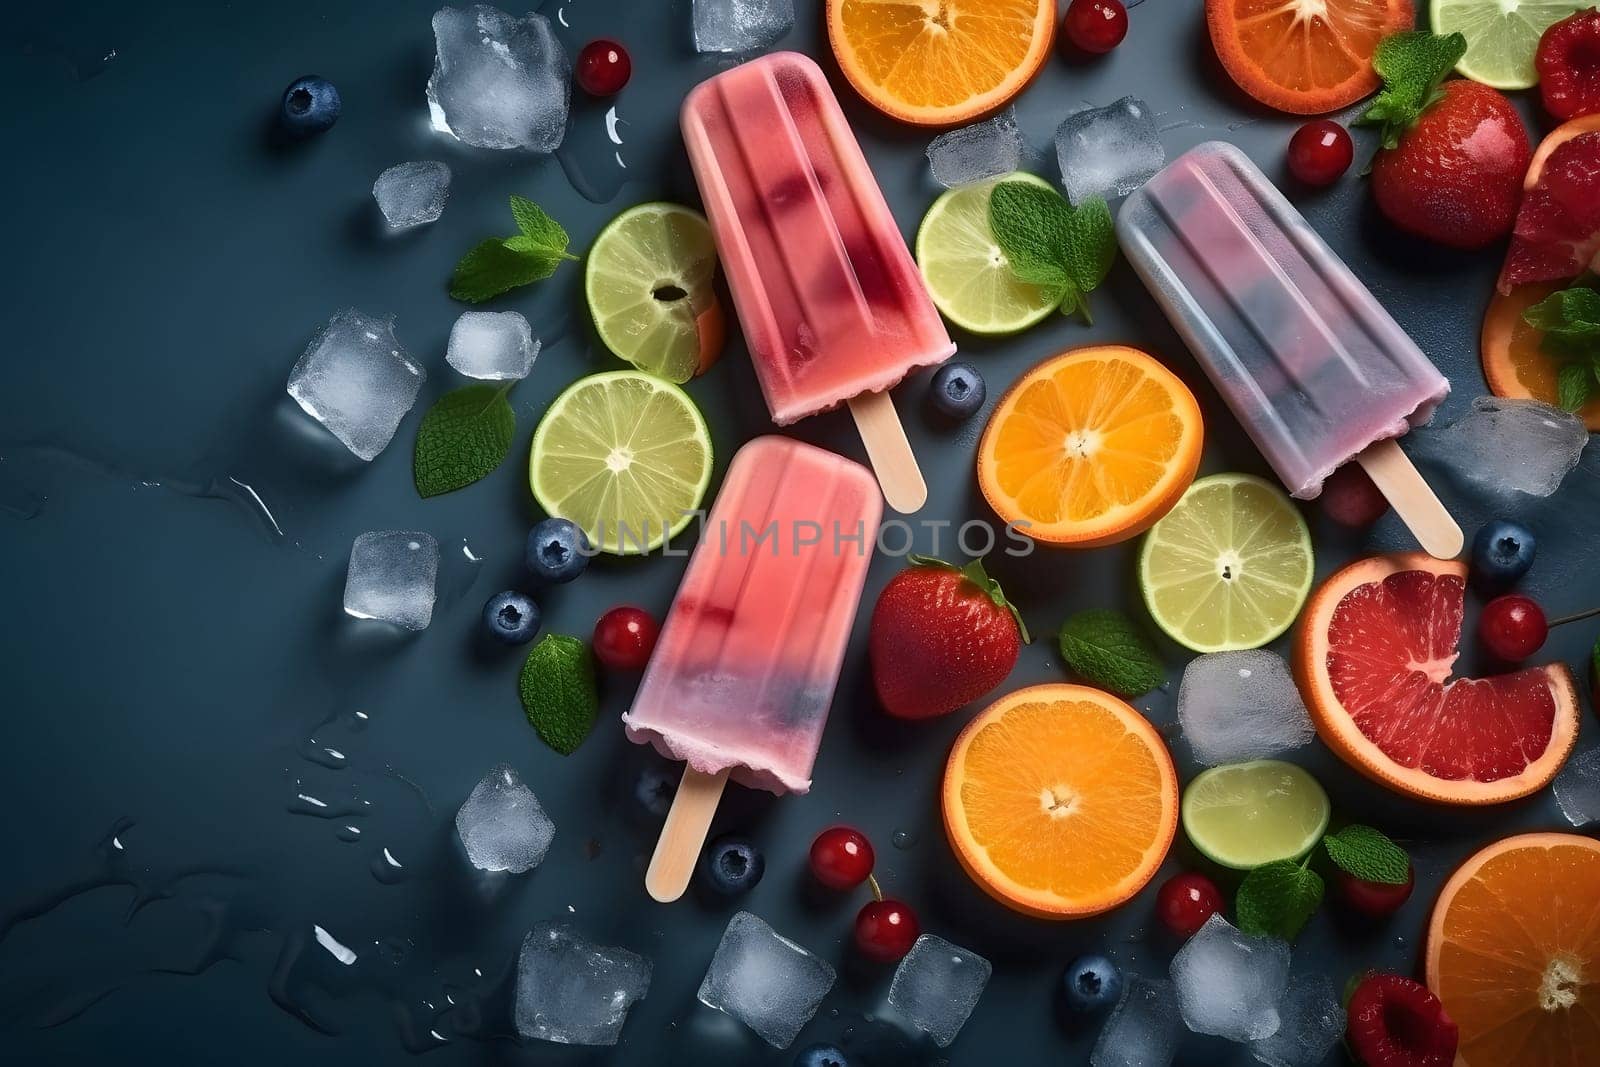 ice cream popsicles with fruits and ice cube on flat surface, high angle view, neural network generated image by z1b